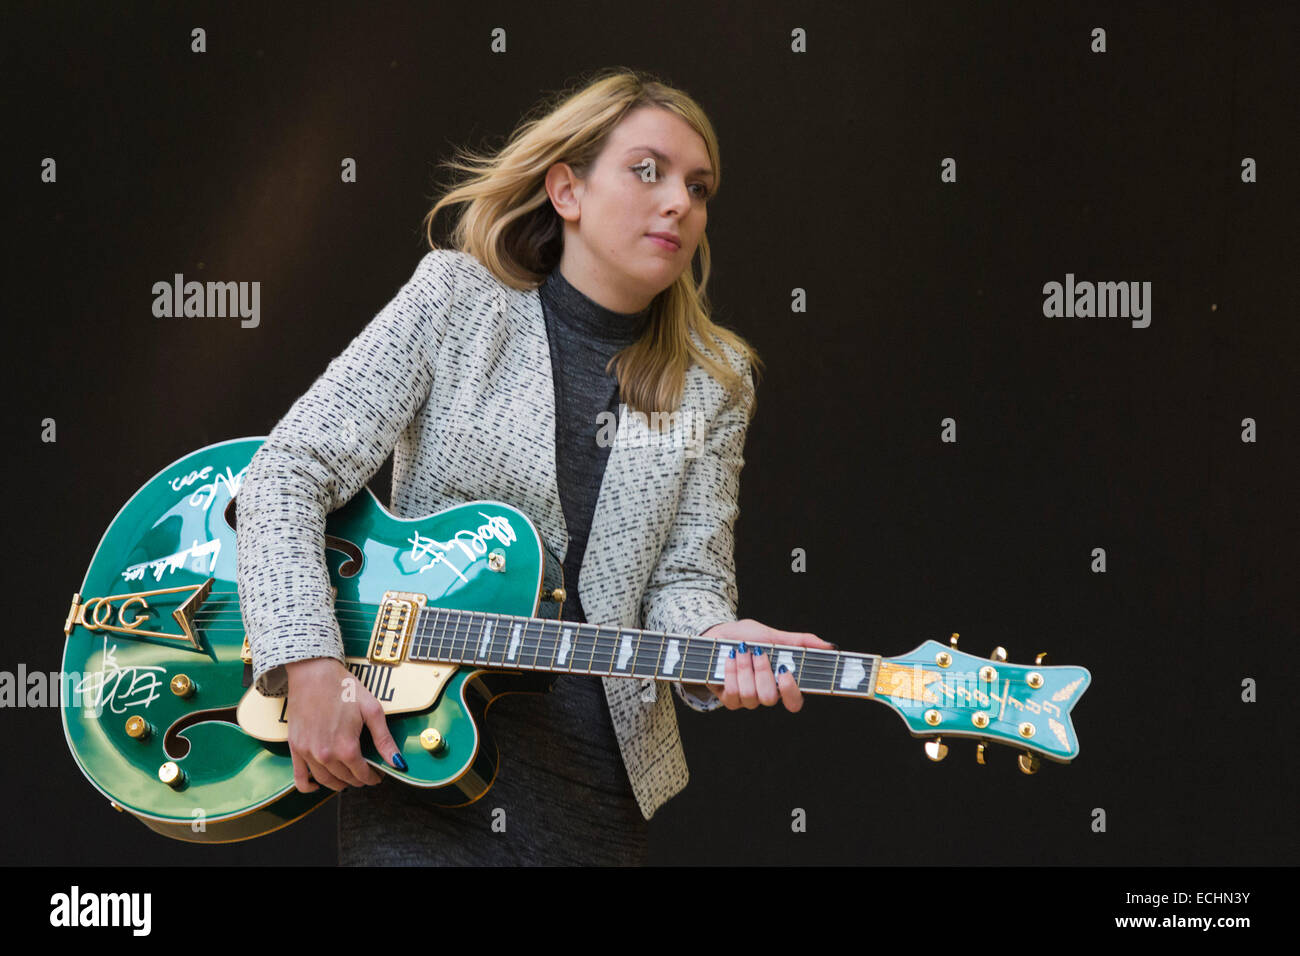 London, UK. 12 December 2014. A Christie's employee poses with Bono's custom prototype Gretsch Irish Falcon electric guitar signed by all four members of U2, estimate GBP 120,000-180,000. Christie's unveils Memorabilia of Hollywood Icons & Music Legends from the 20/21 Pop Culture Sale ahead of a free public view from 13 to 16 December 2014, with the auction taking place on 16 December. The sale celebrates some of the great names of 20th century cinema and music legends, featuring costumes and film scripts, instruments and handwritten song lyrics. Stock Photo